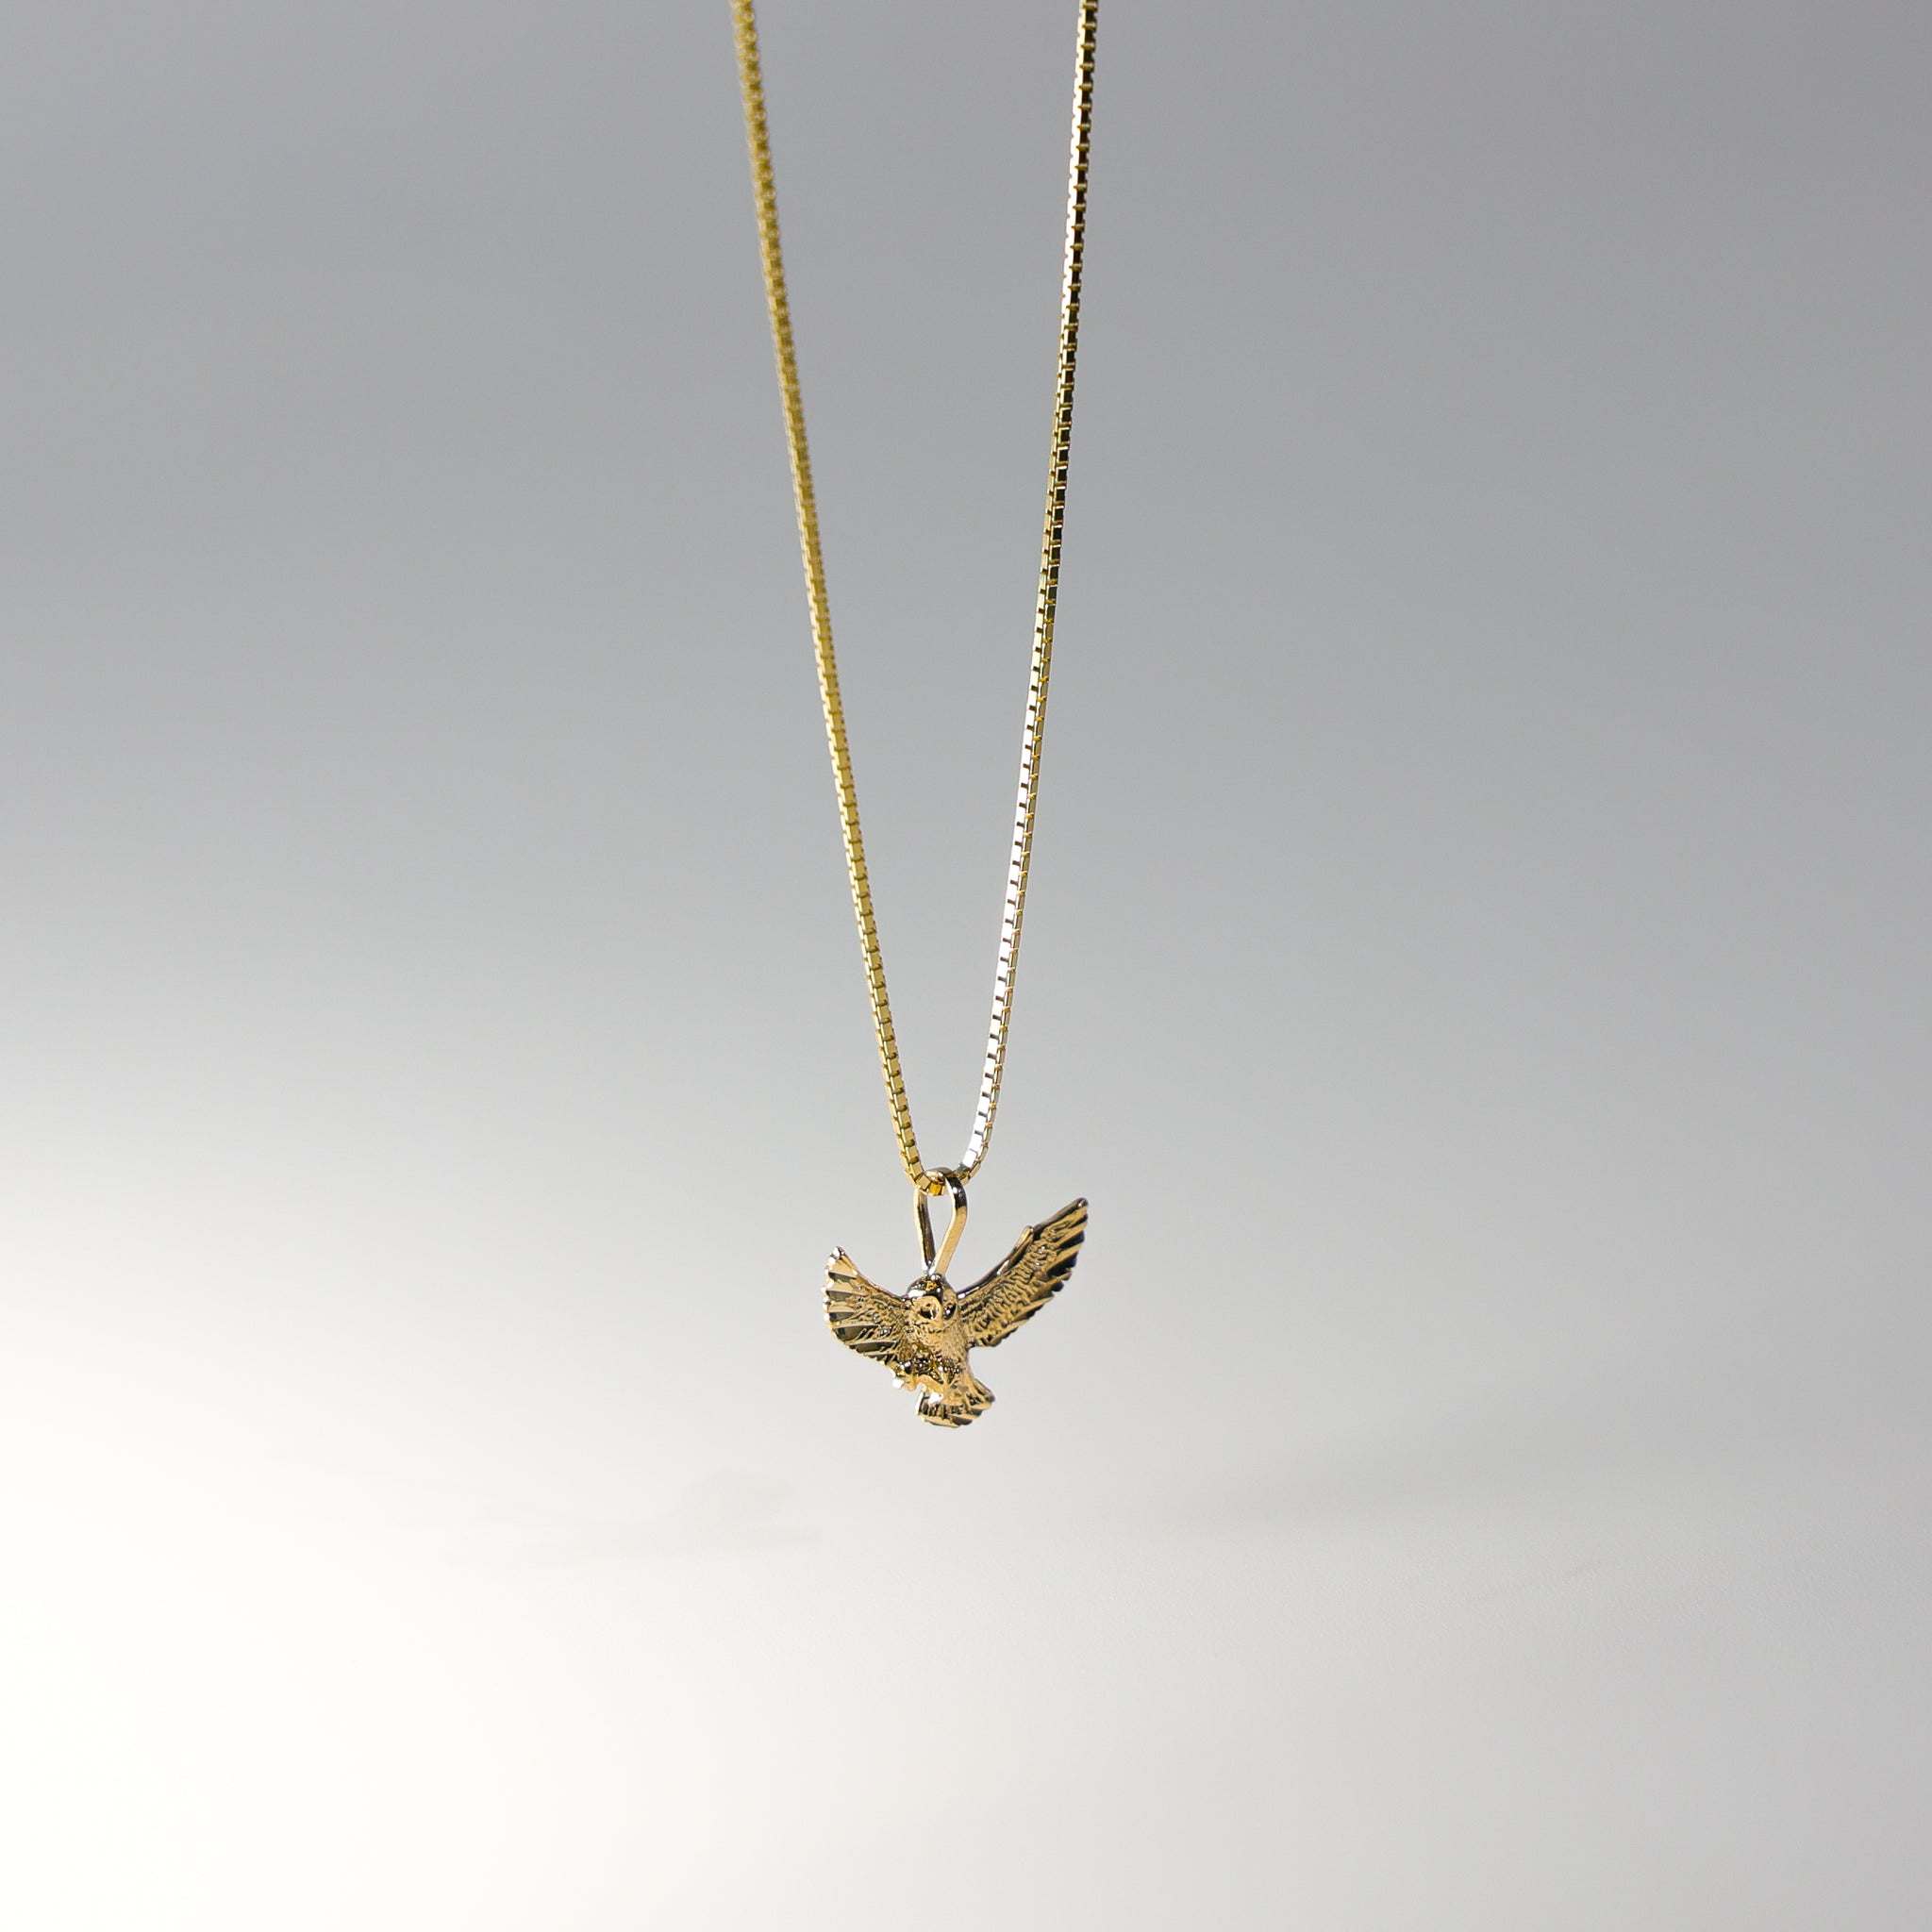 Gold Flying Owl Pendant Model-2349 - Charlie & Co. Jewelry